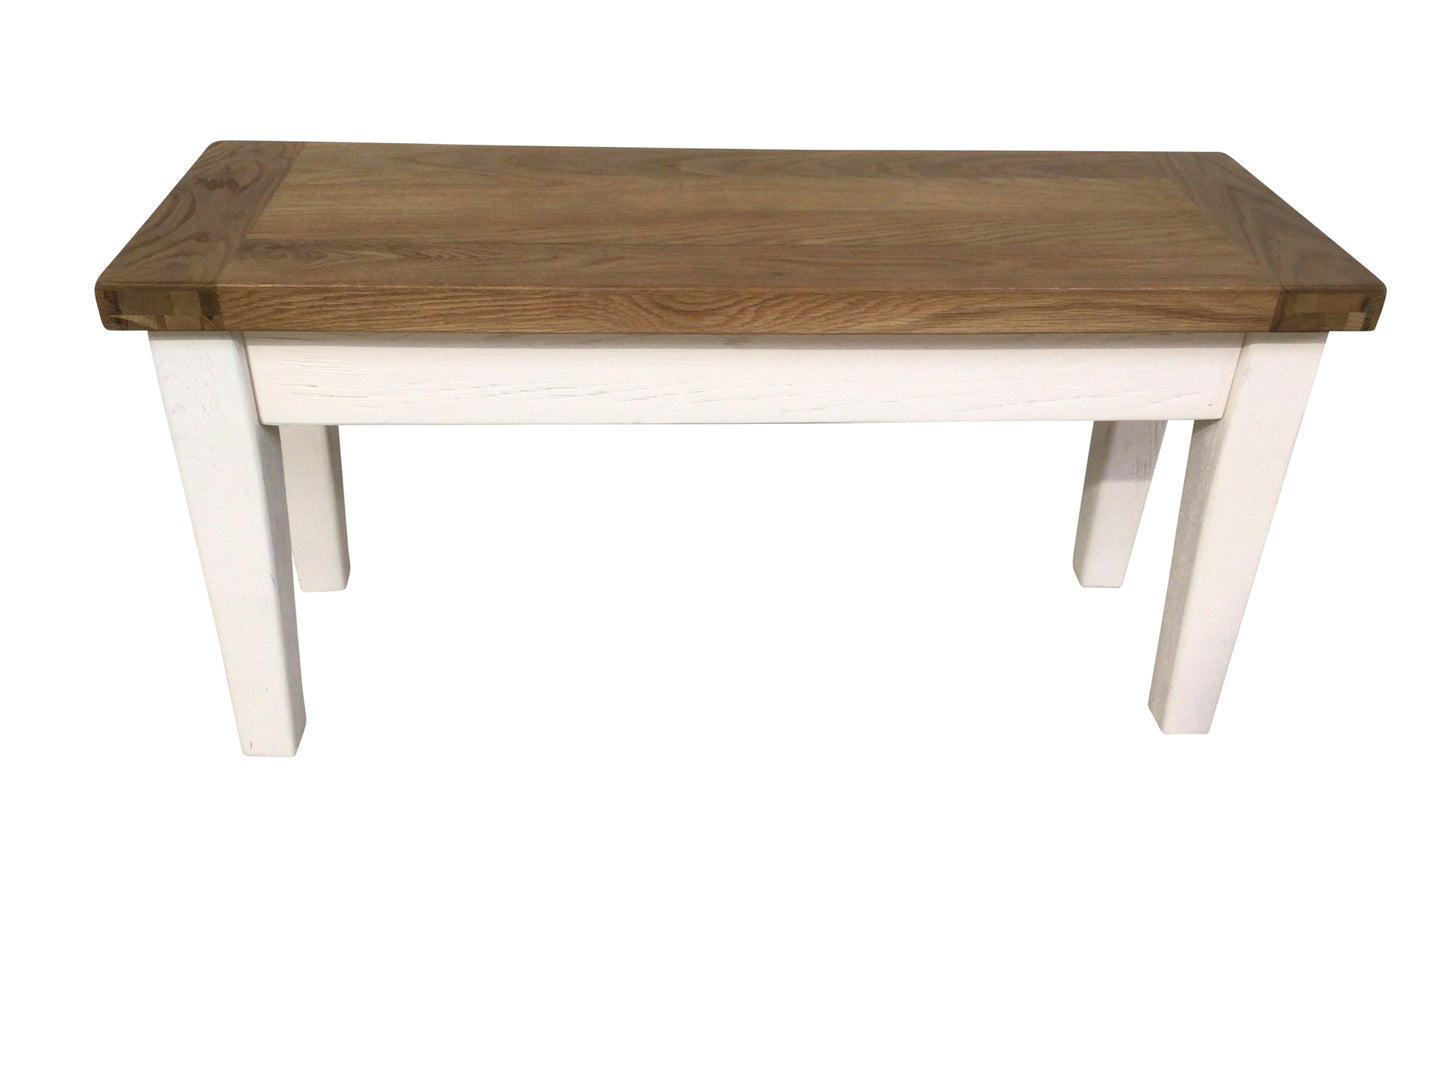 Calgary Oak 1m Bench painted Off-White